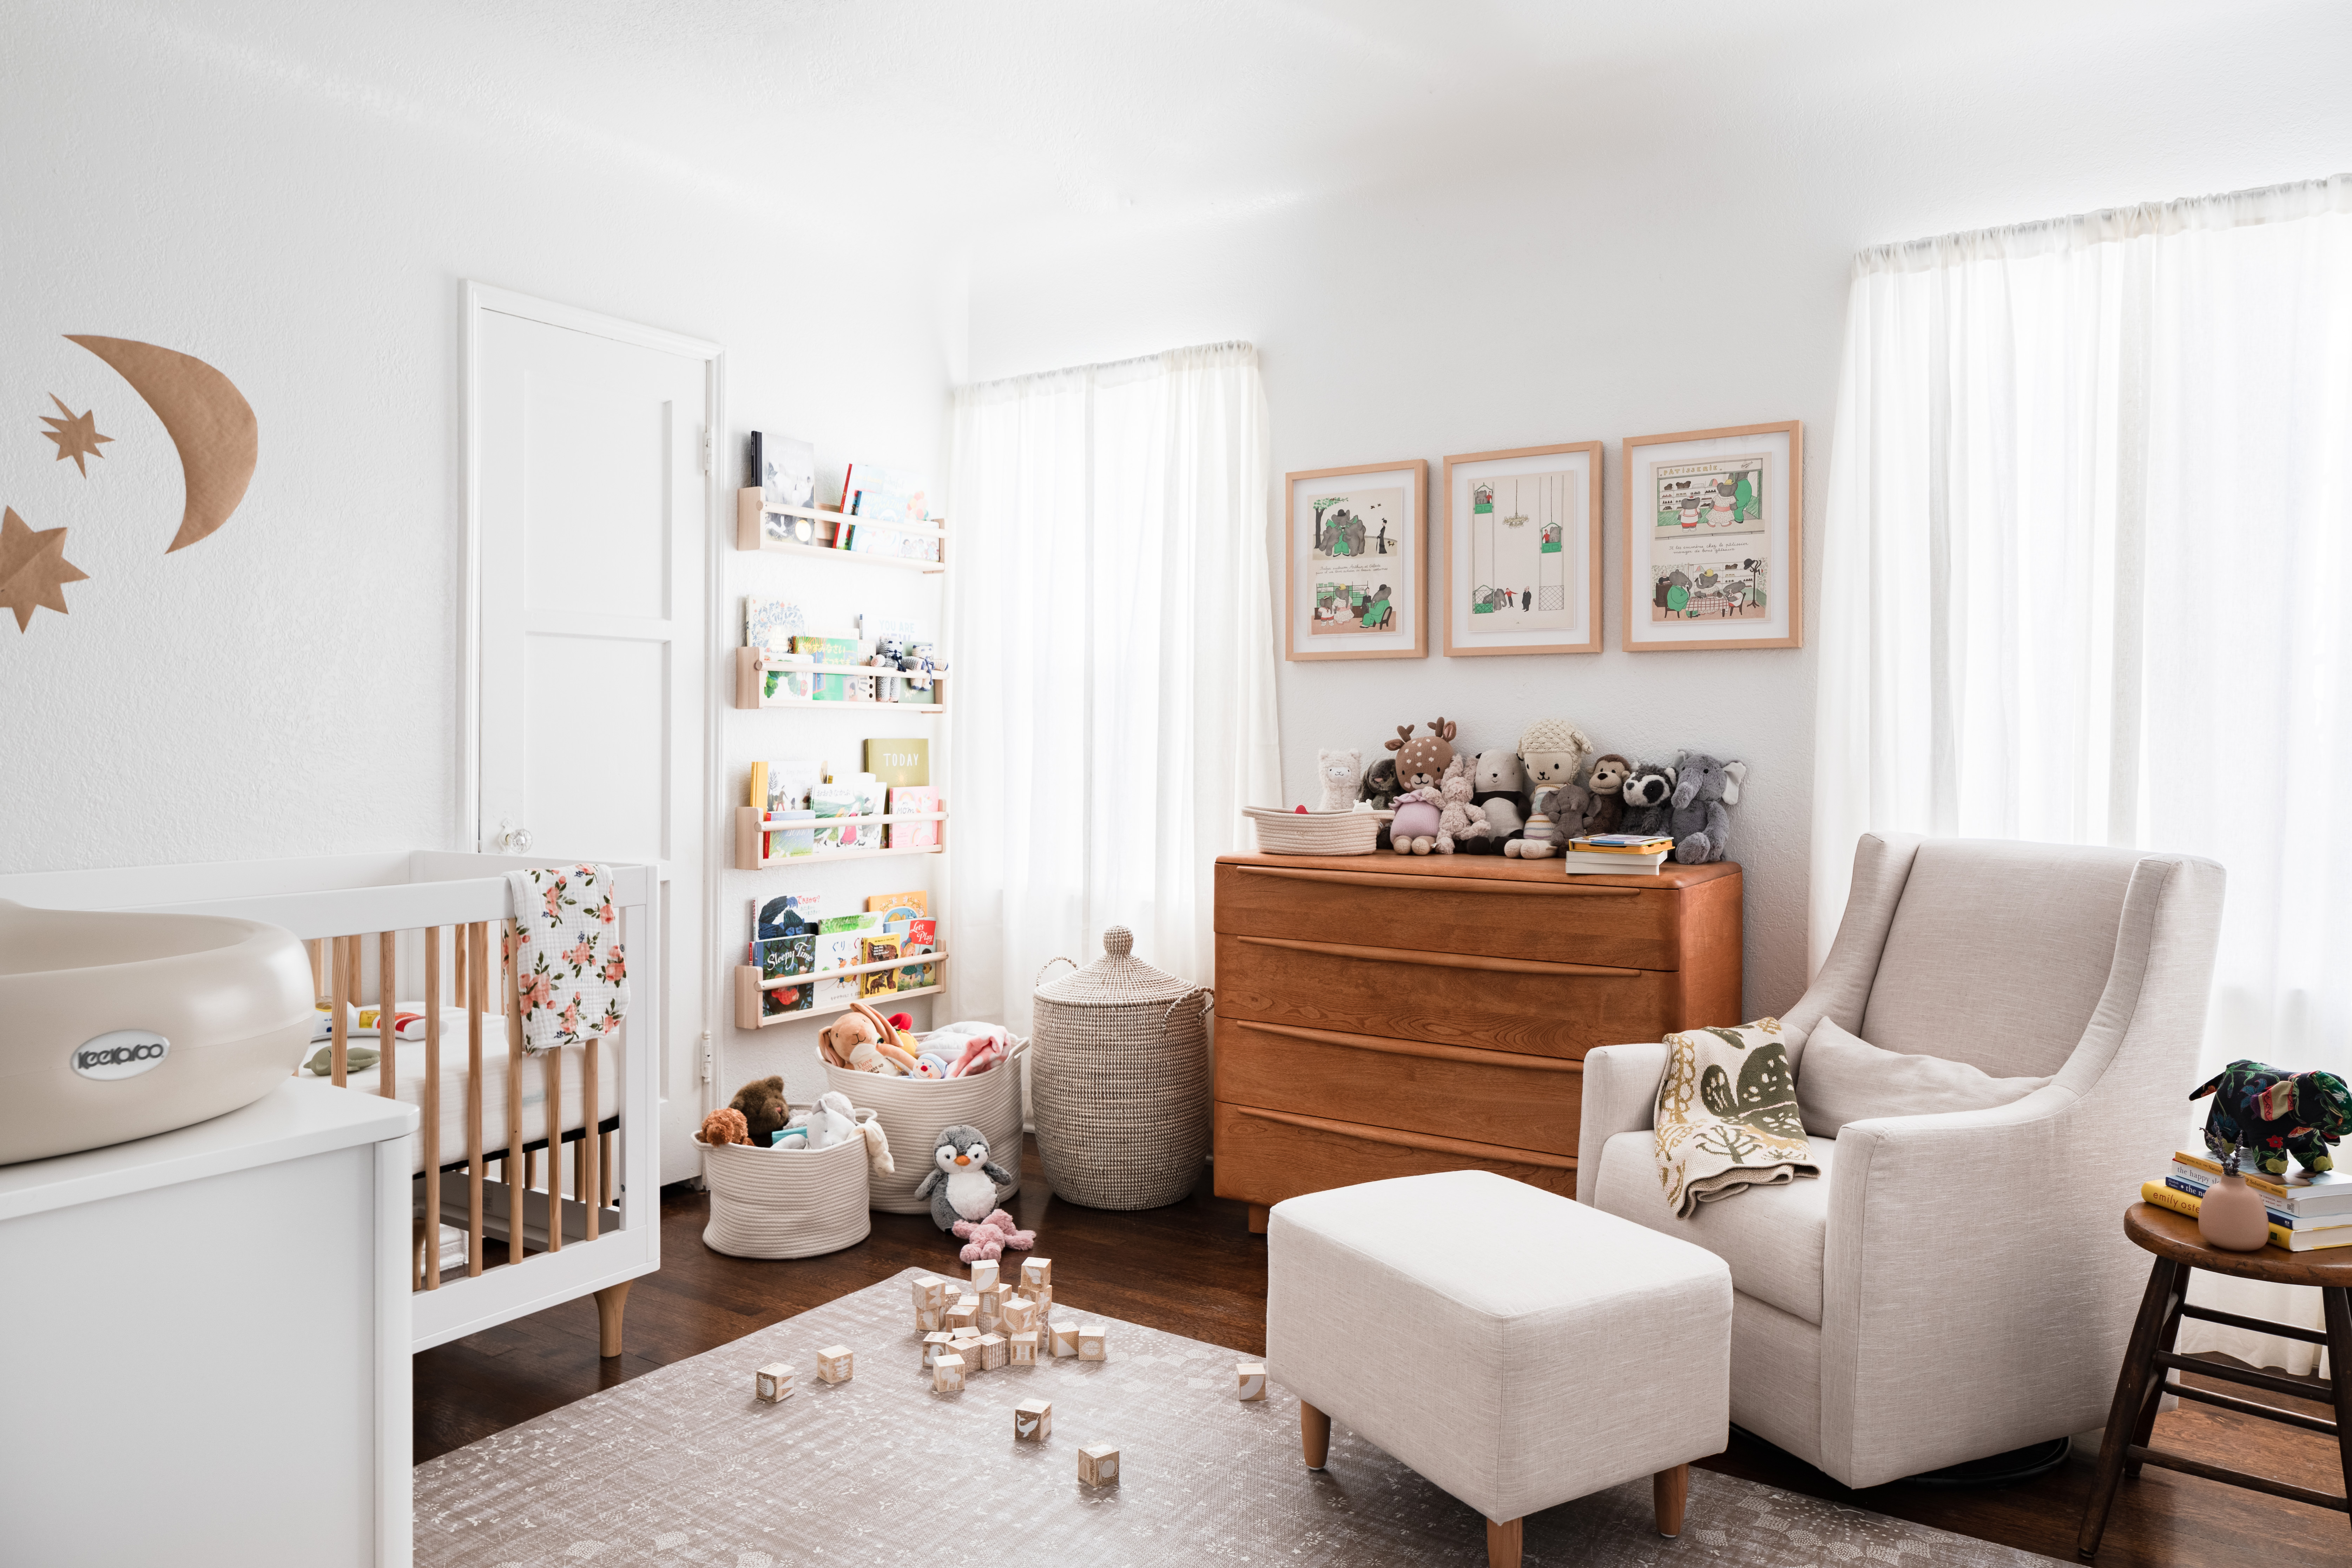 6 Amazing Ideas for Living Room Toy Storage - Hello Central Avenue